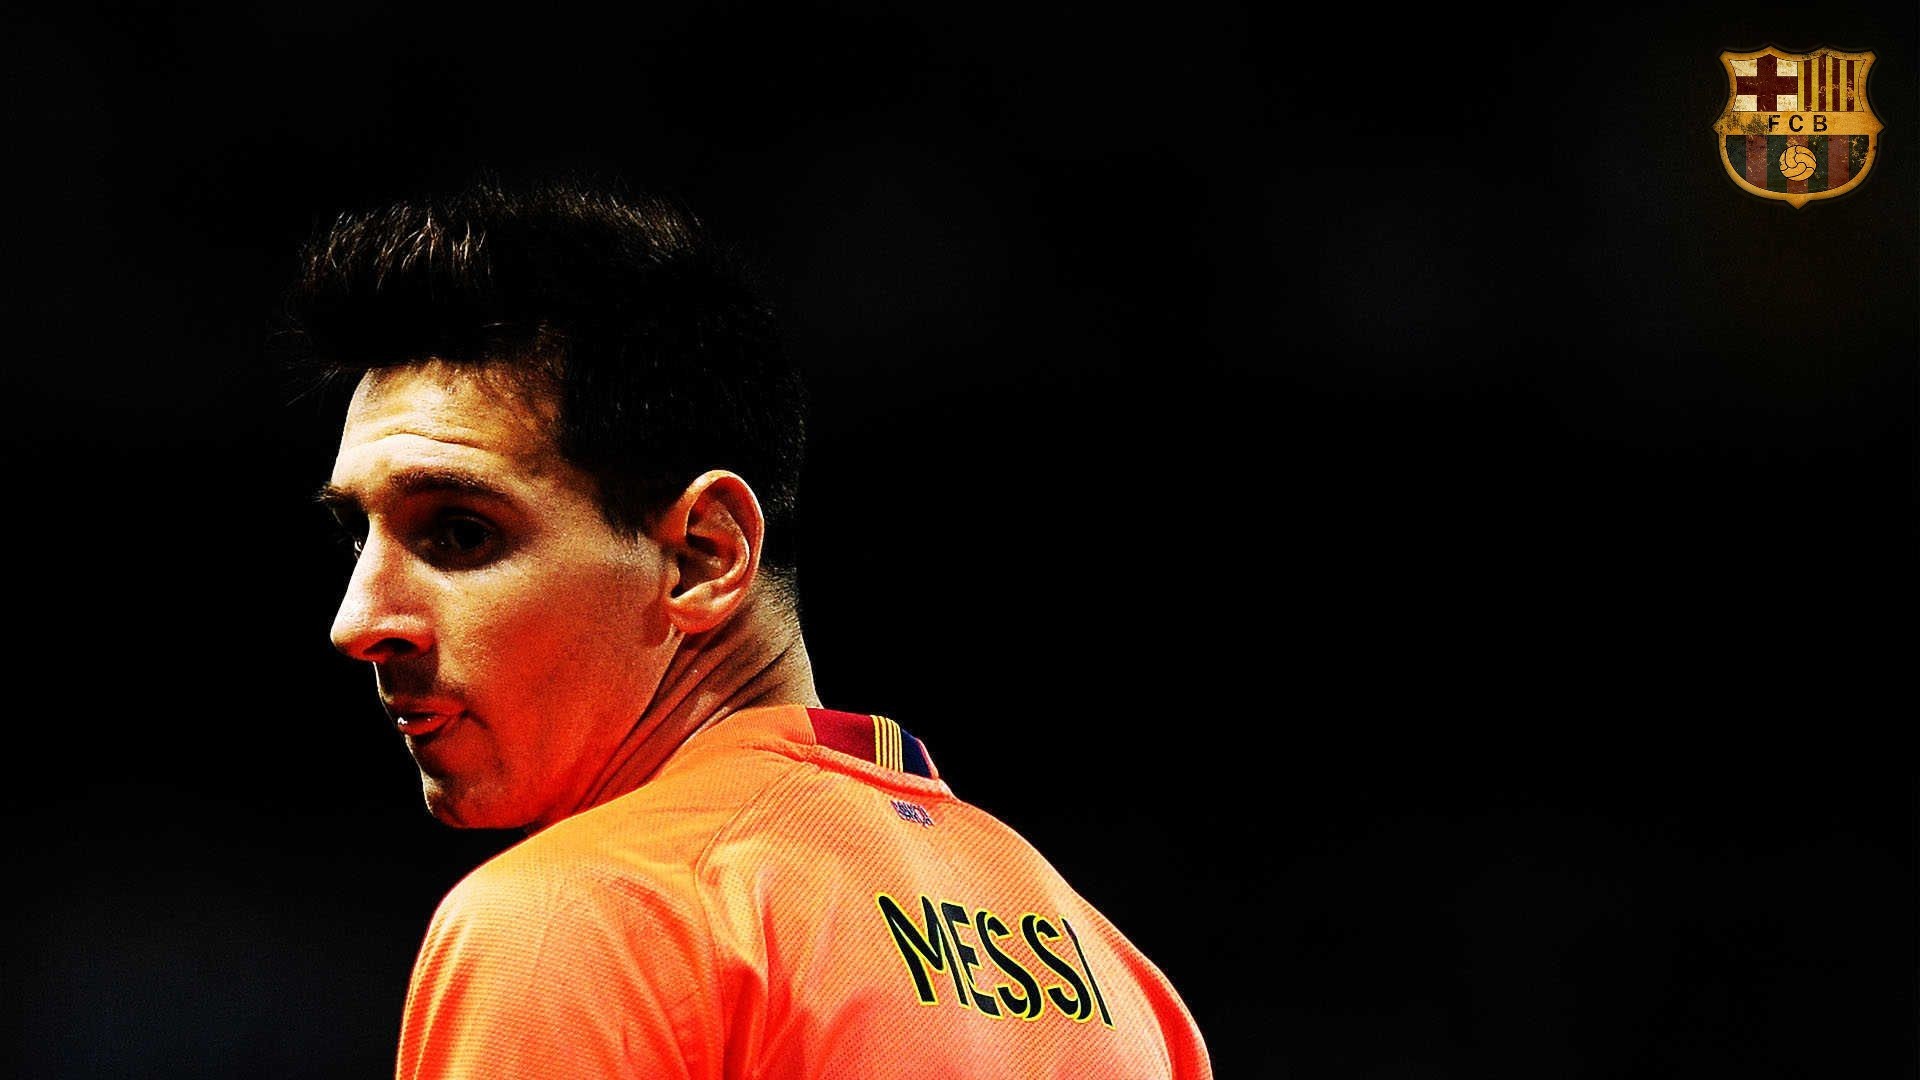 Windows Wallpaper Lionel Messi Barcelona With Resolution 1920X1080 pixel. You can make this wallpaper for your Mac or Windows Desktop Background, iPhone, Android or Tablet and another Smartphone device for free